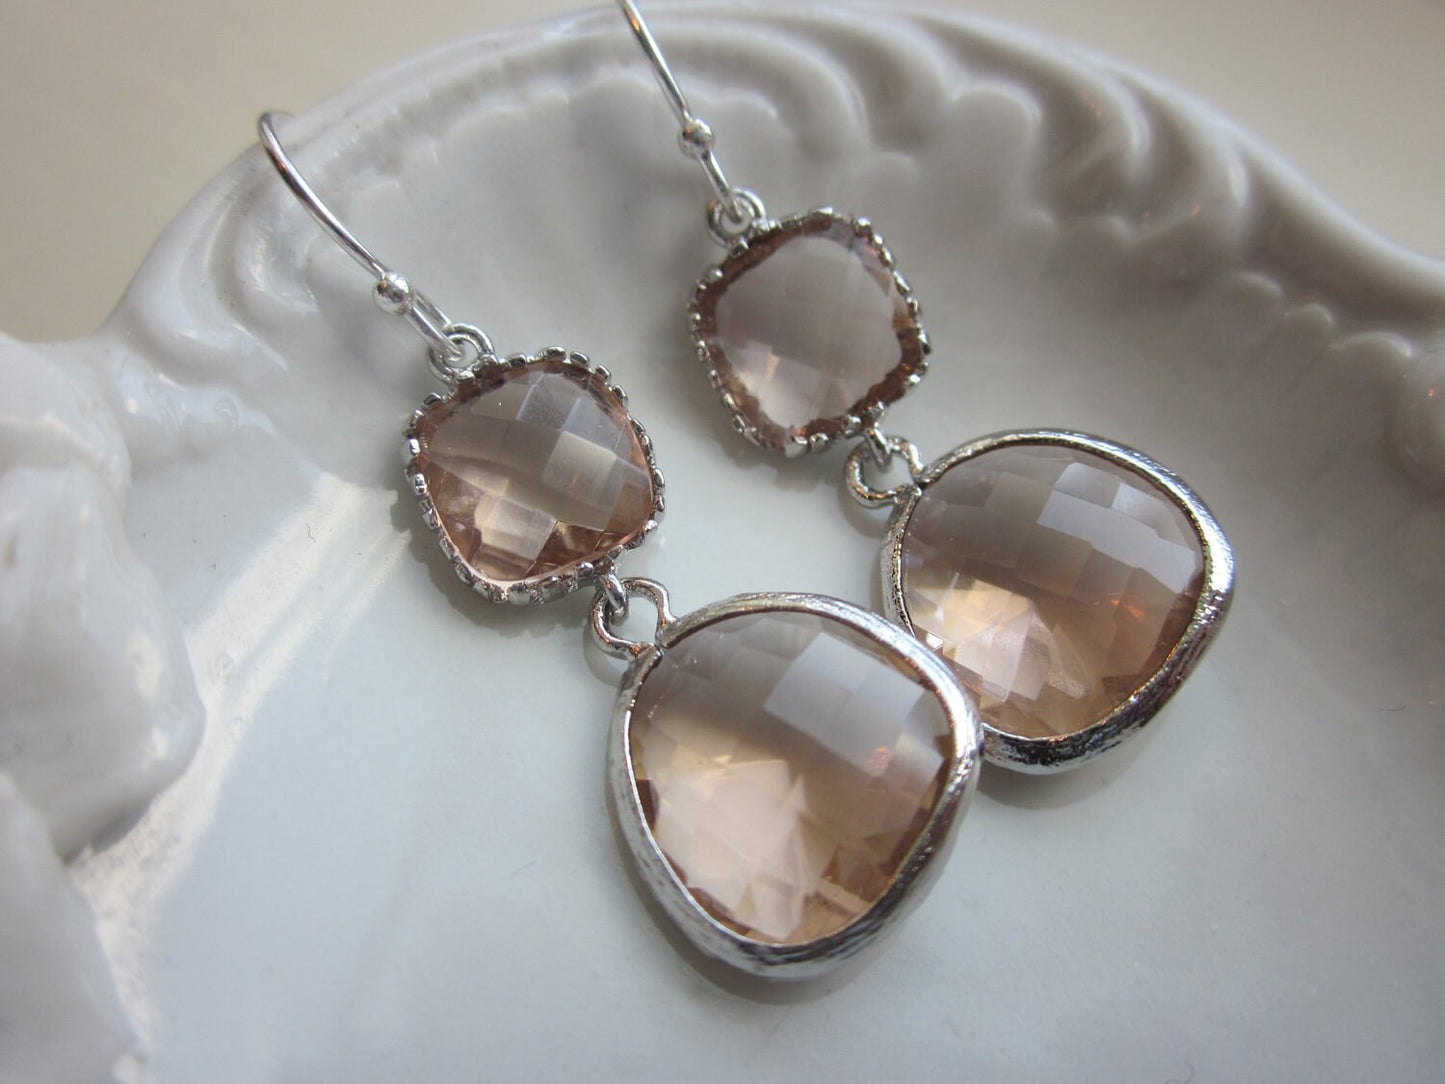 Champagne Peach Earrings Pink Silver Two Tier - Bridesmaid Earrings - Wedding Earrings - Valentines Day Gift